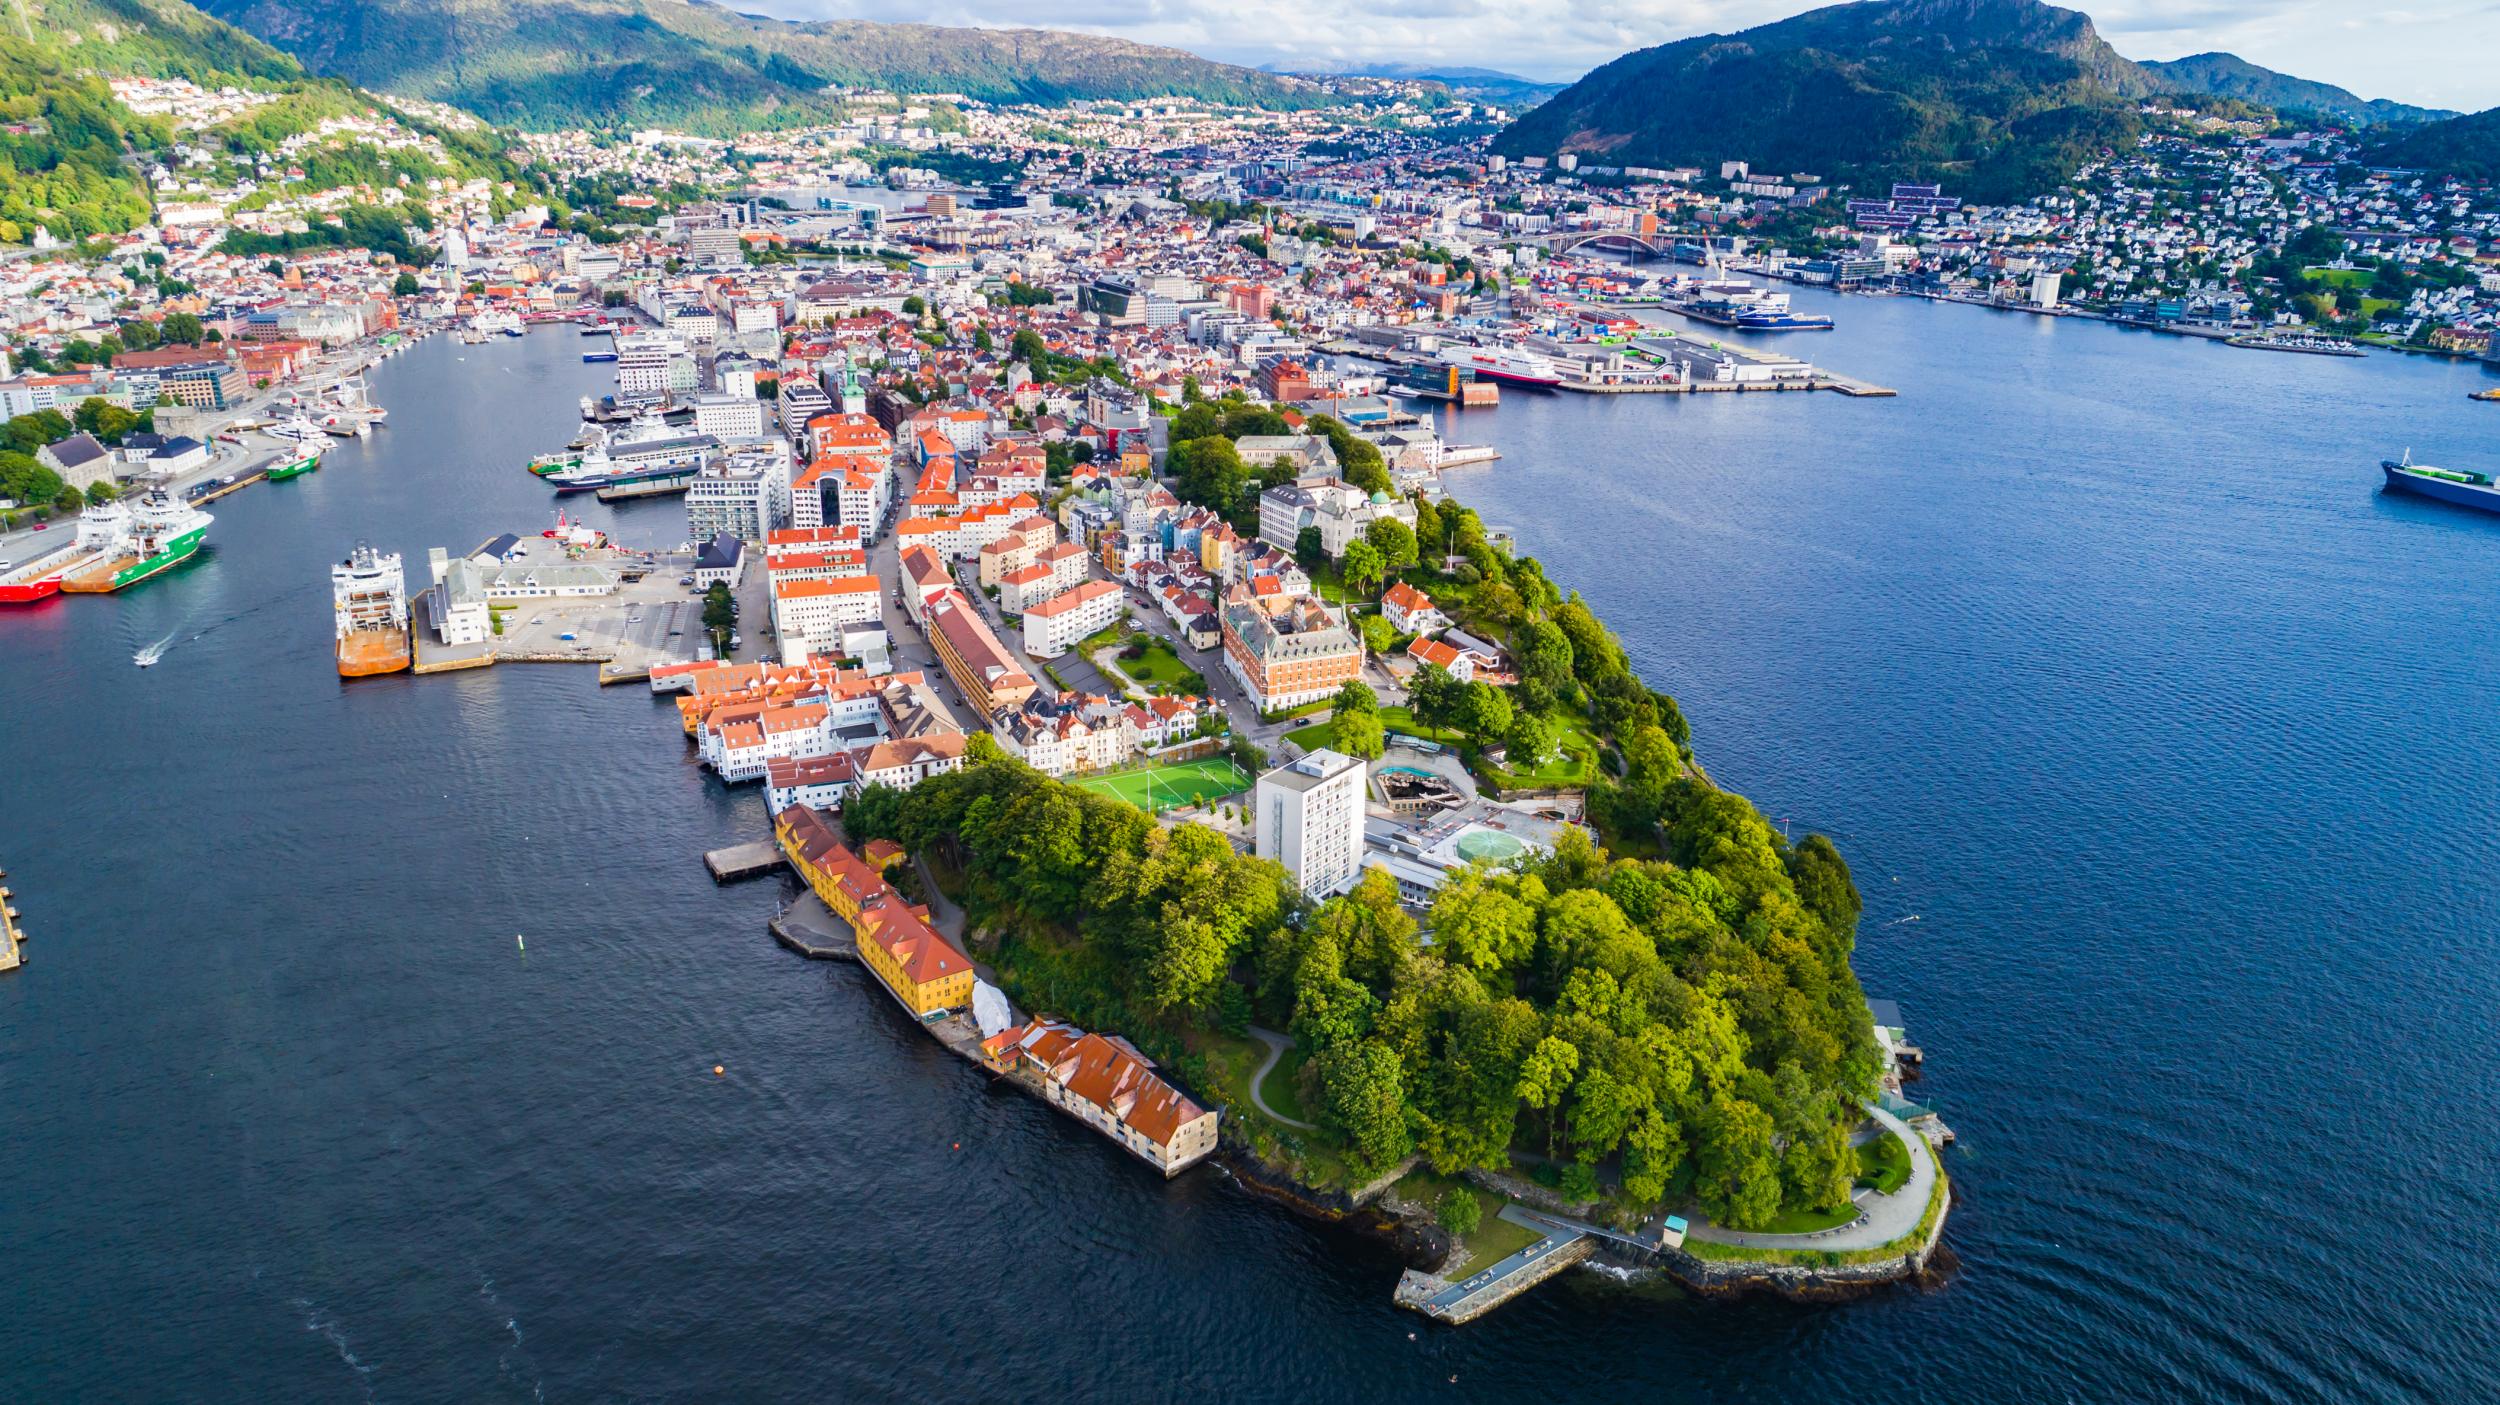 Bergen Old Town is surrounded by water